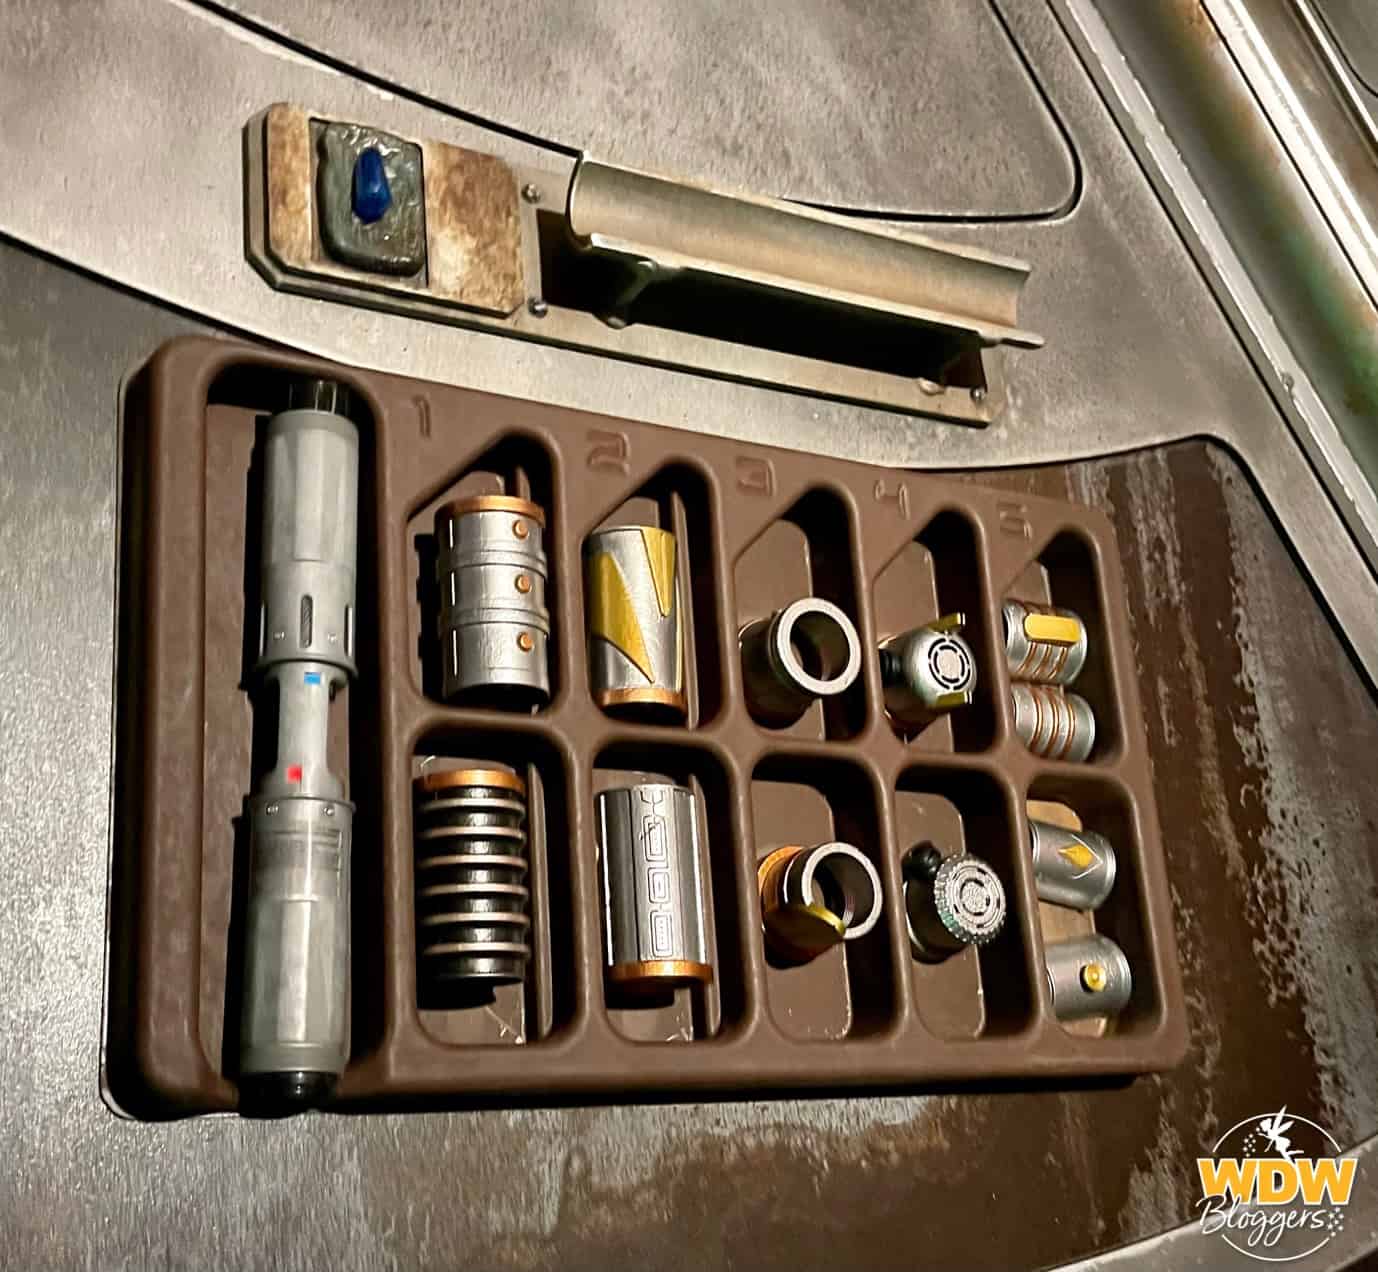 Savi's Workshop at Star Wars Galaxy's Edge Protection and Defense Pieces